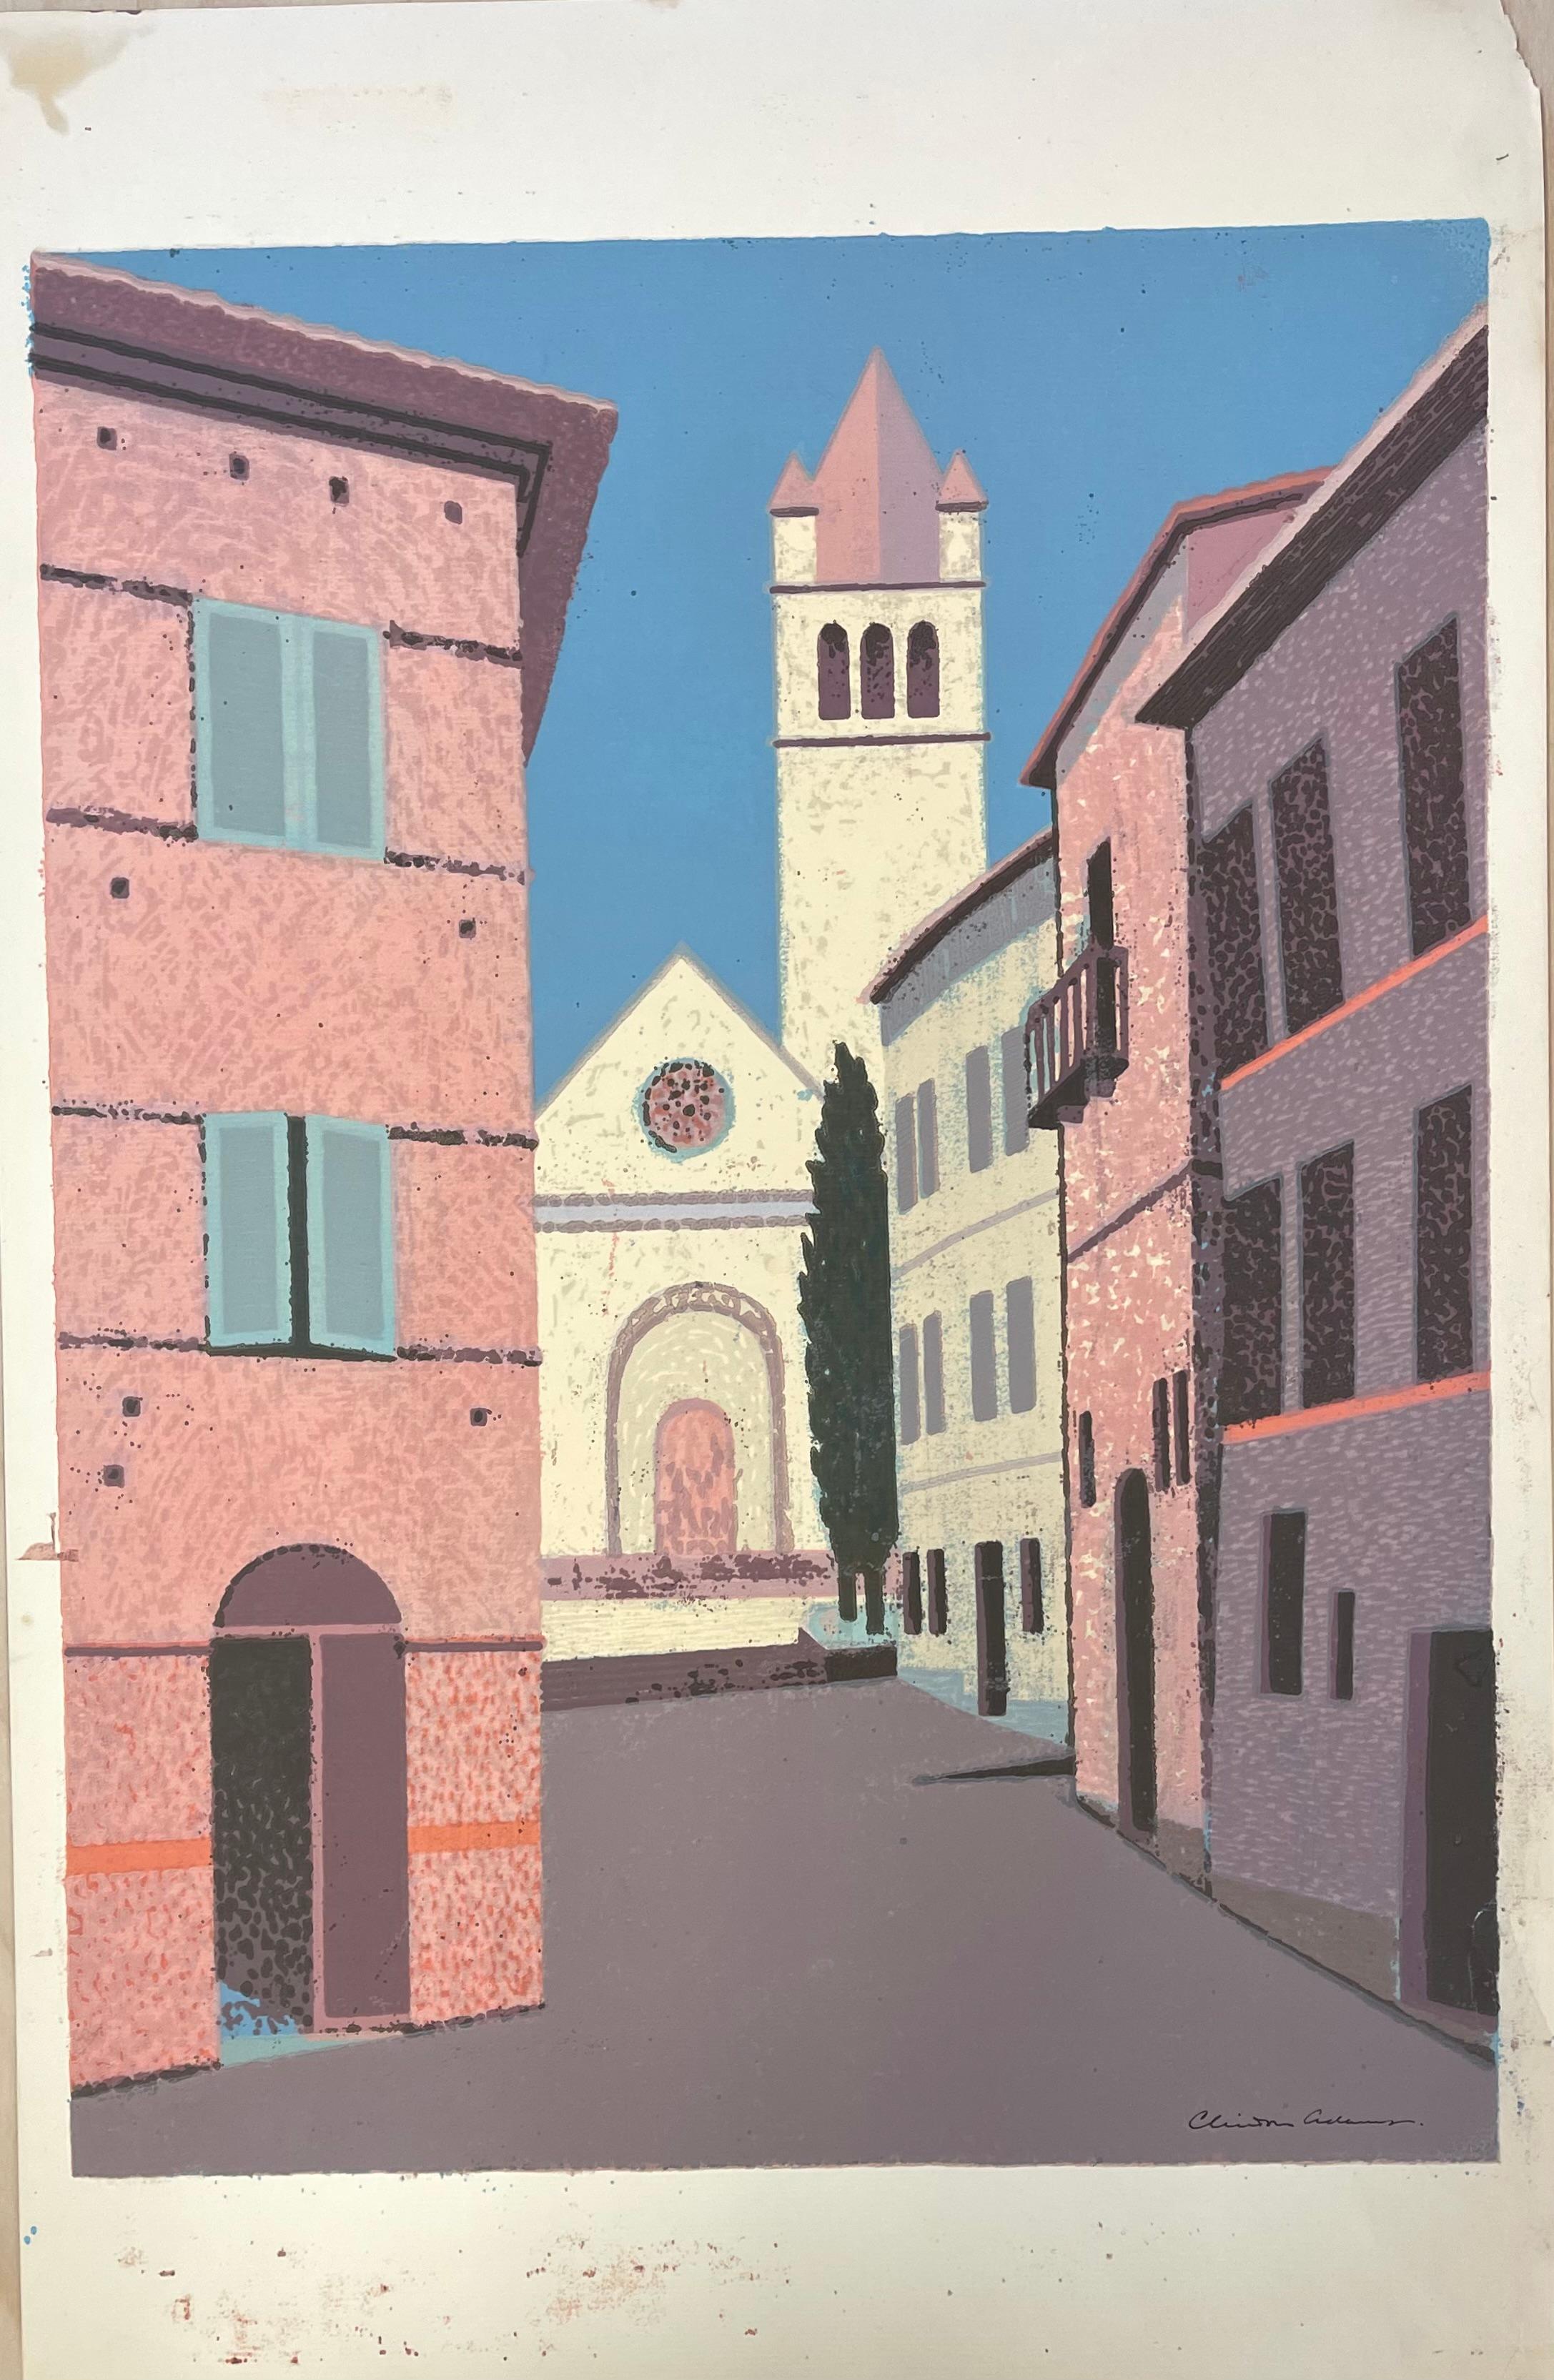 Adams, Clinton (American 1918-2002). TWO SCREENPRINTS OF ITALIAN TOWNS. Signed in the matrix. Edition sizes not known. Each 16 x 12 inches (image), 20 x 13 inches (sheet). One with a loss at the upper right corner, the other with a clentear in the